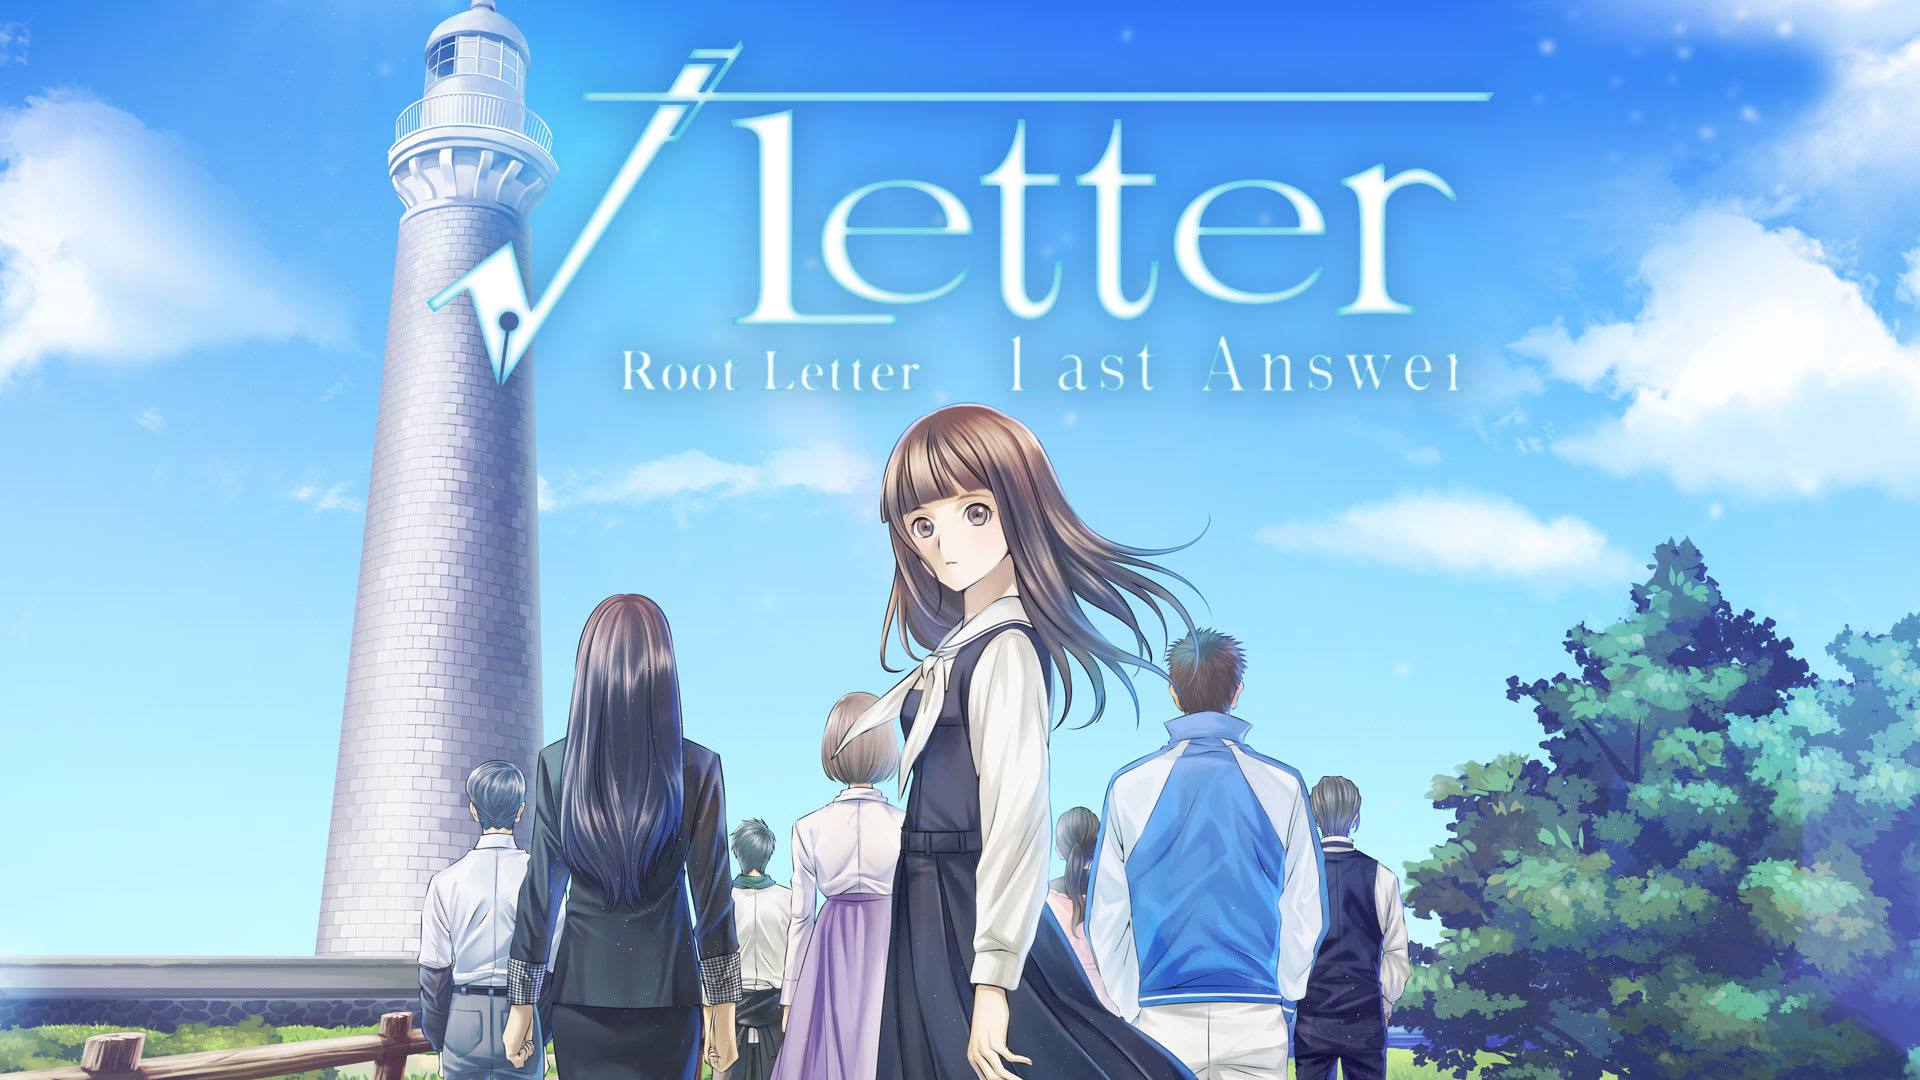 Root Letter: Last Answer 1